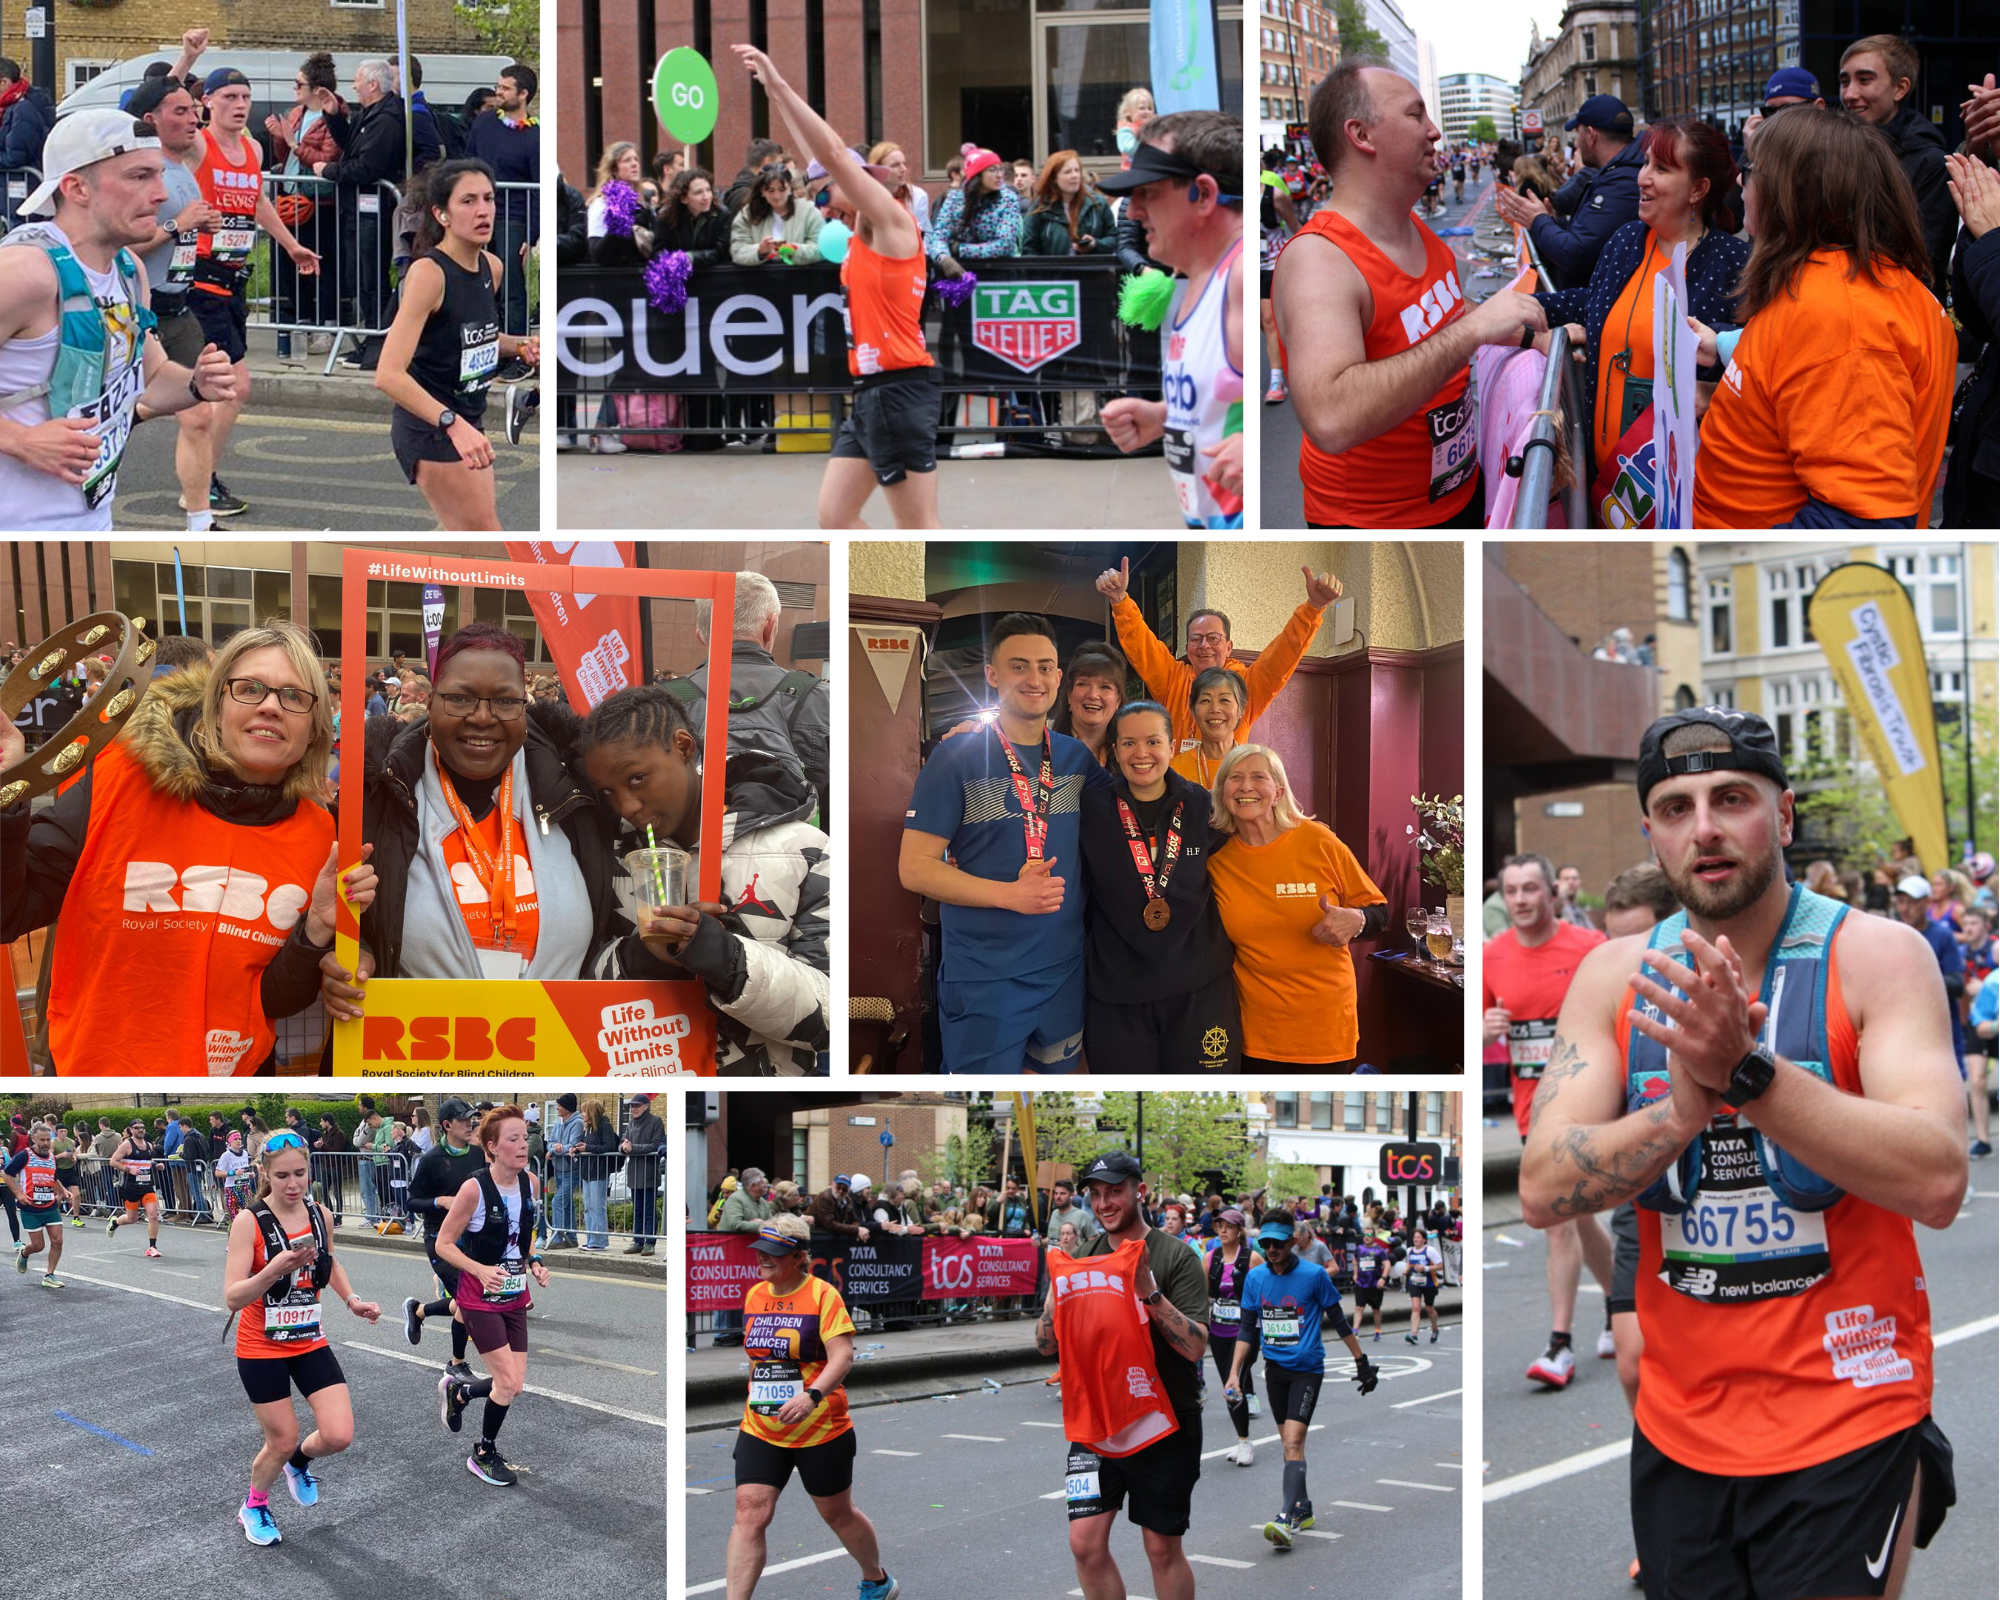 A photo album of 9 images from the London Marathon. The photos are a group shot of volunteers standing on a street holding a selfie frame, runners on the street of London - some waving to the crowd, a male runner clapping, and runners posing with their medals.